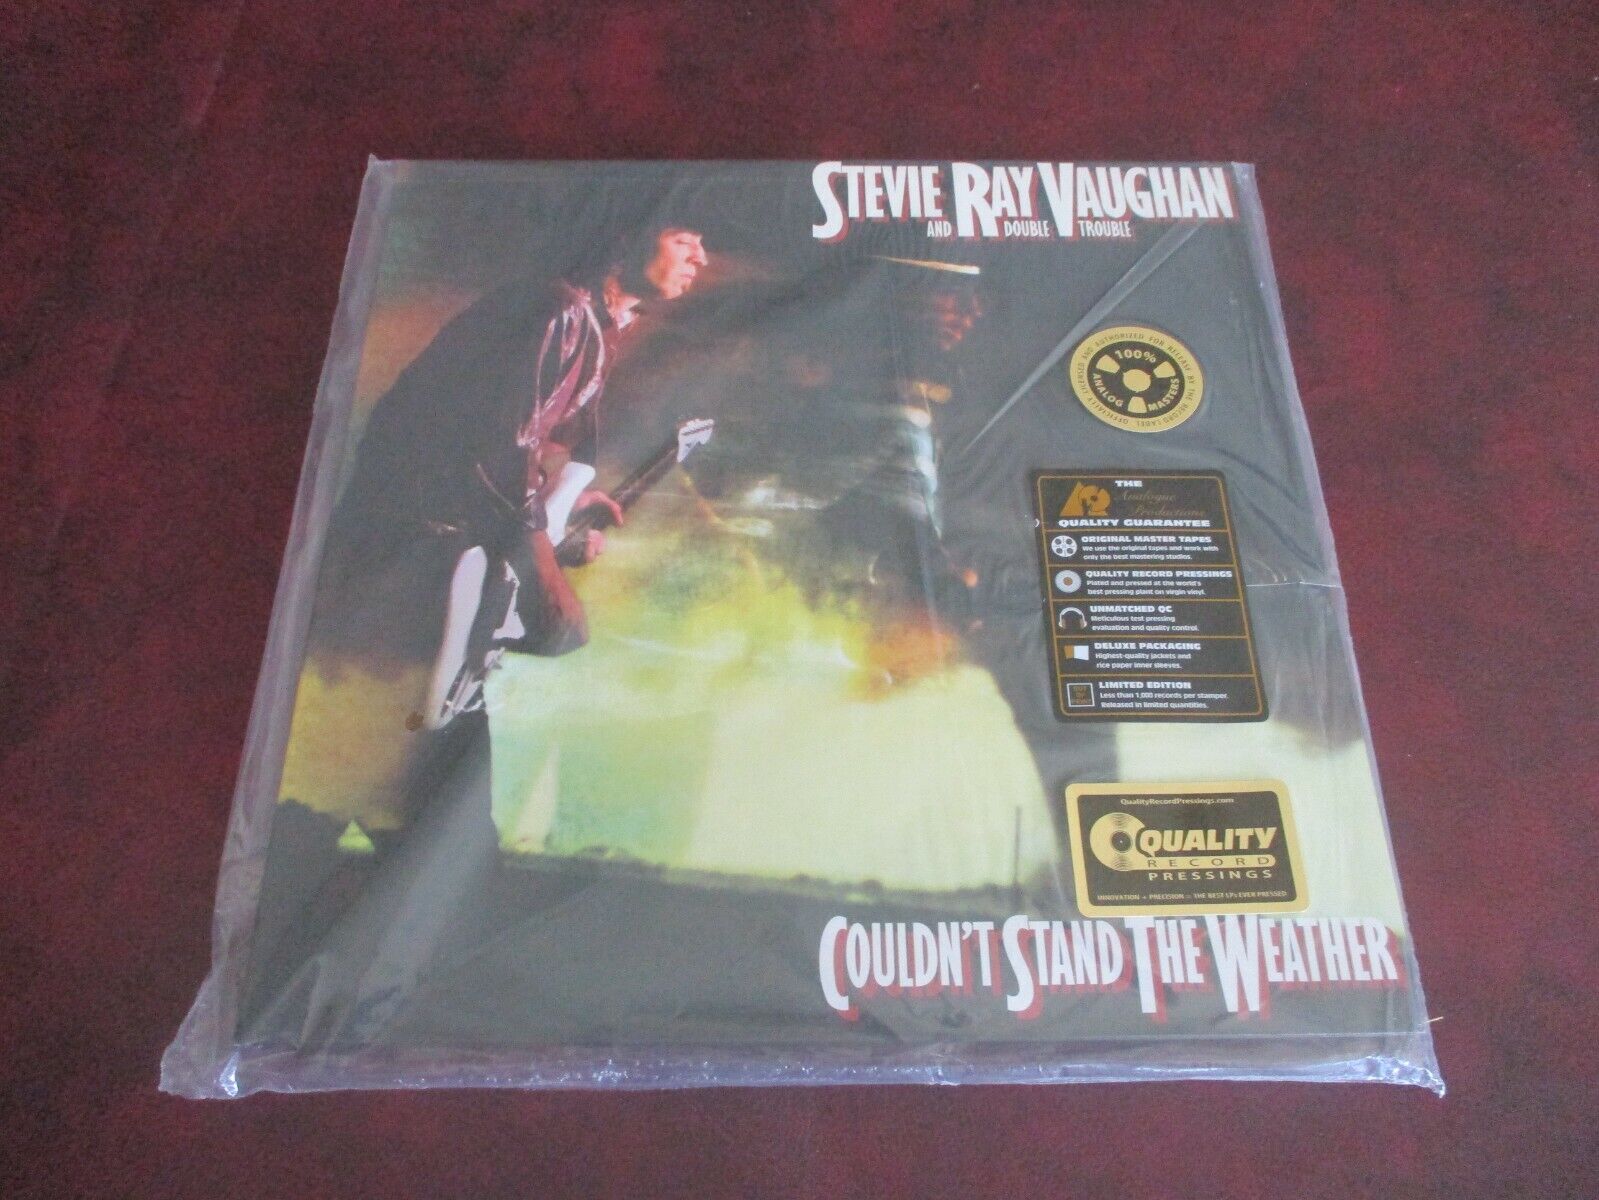 STEVIE RAY VAUGHAN VERIFIED COULDN'T STAND WEATHER 200GRAM 1ST STAMP 45 RPM LP